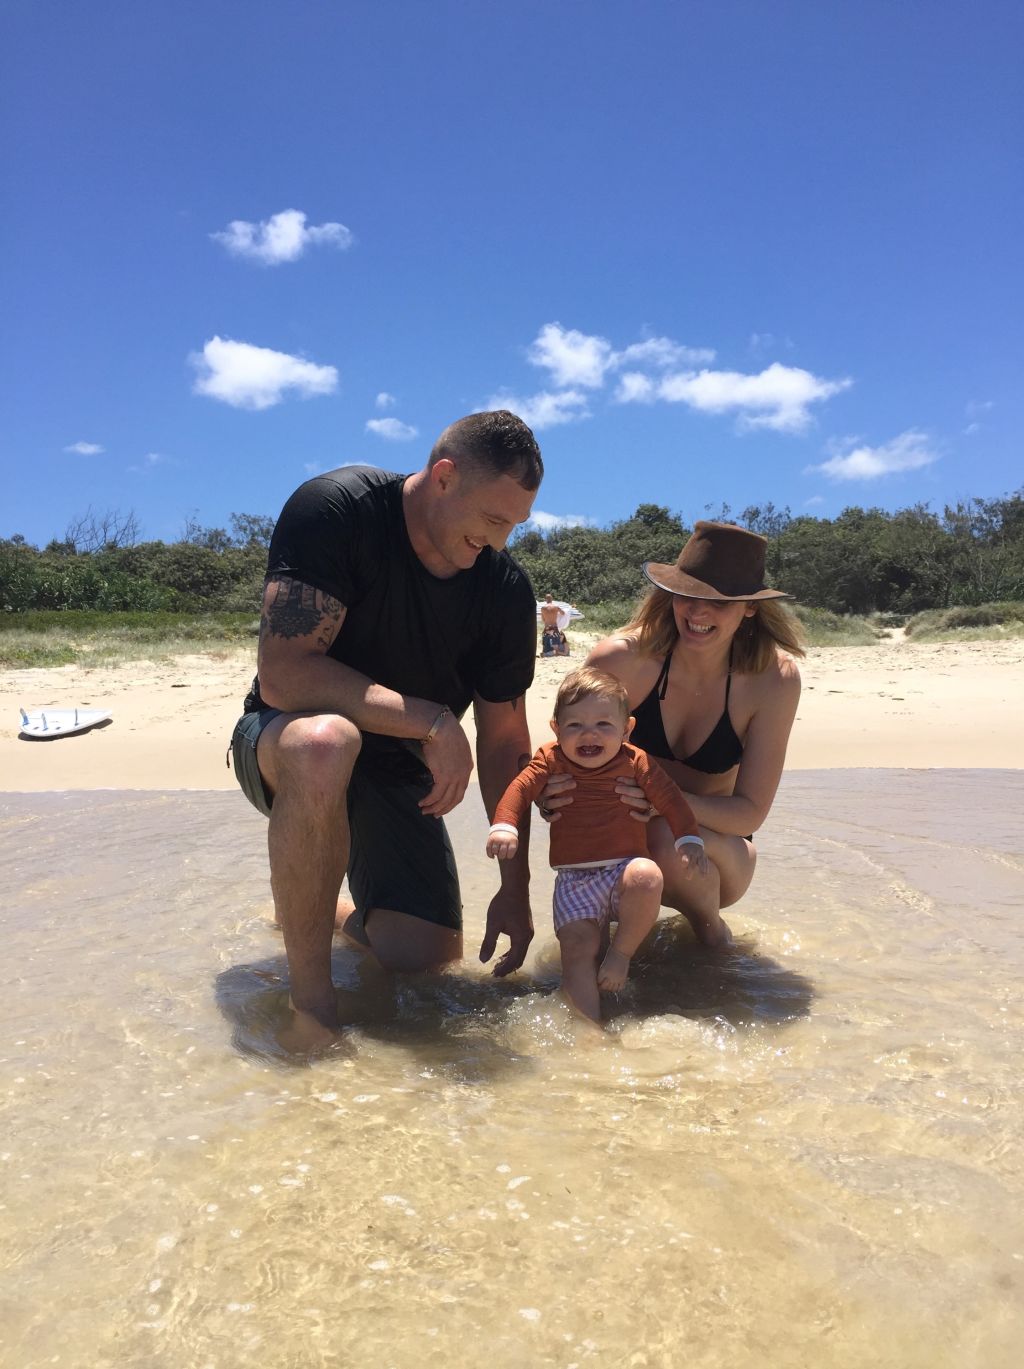 Rugby star Scott Higginbotham with baby Aubrey and wife Madeline at Casuarina Beach. Photo: Supplied